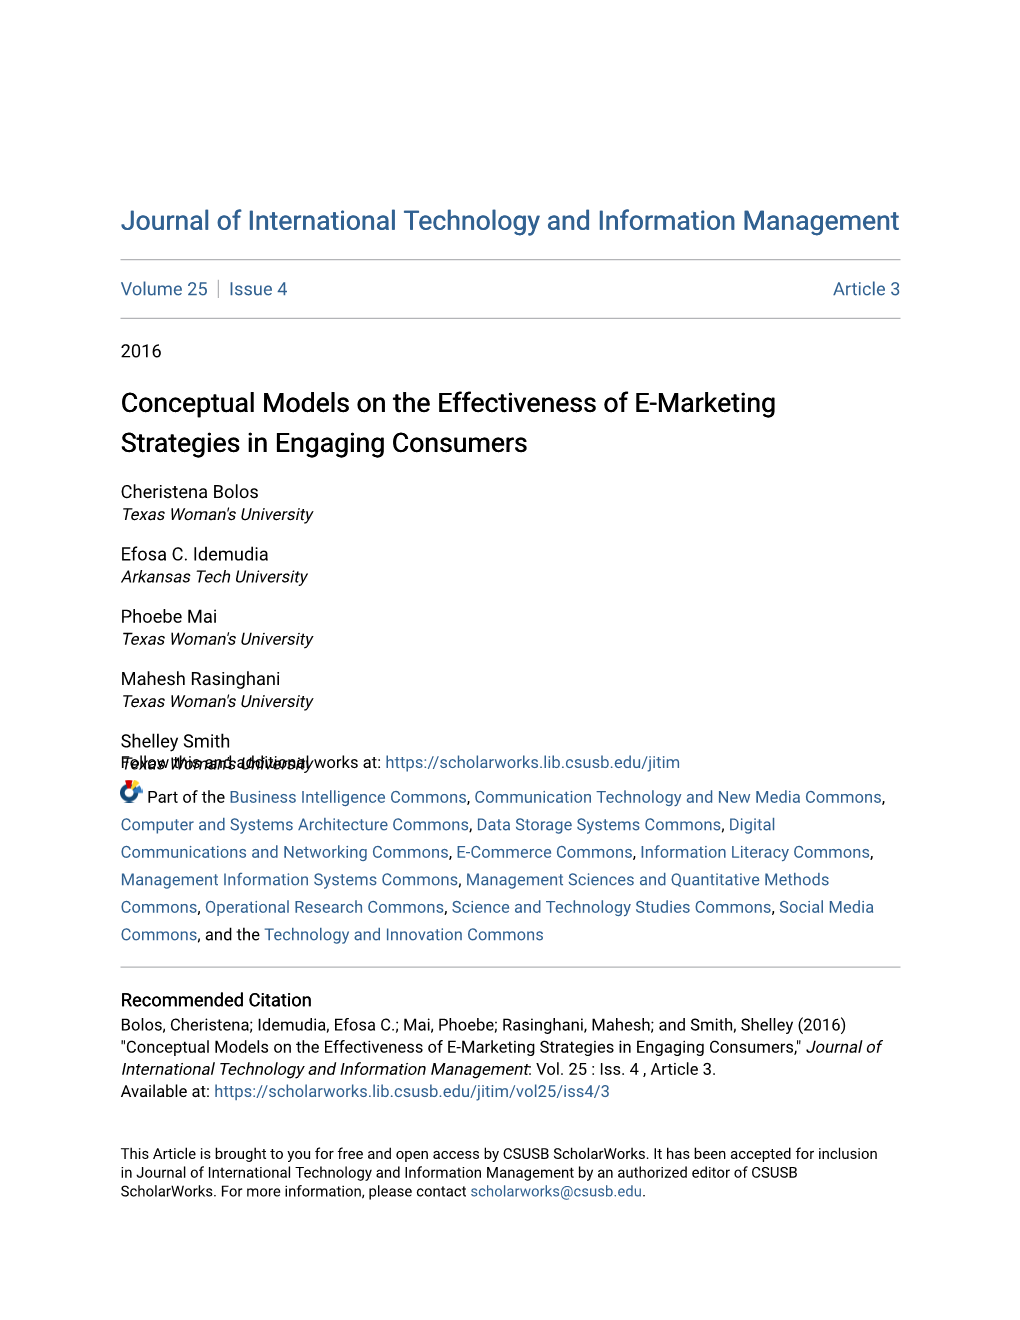 Conceptual Models on the Effectiveness of E-Marketing Strategies in Engaging Consumers